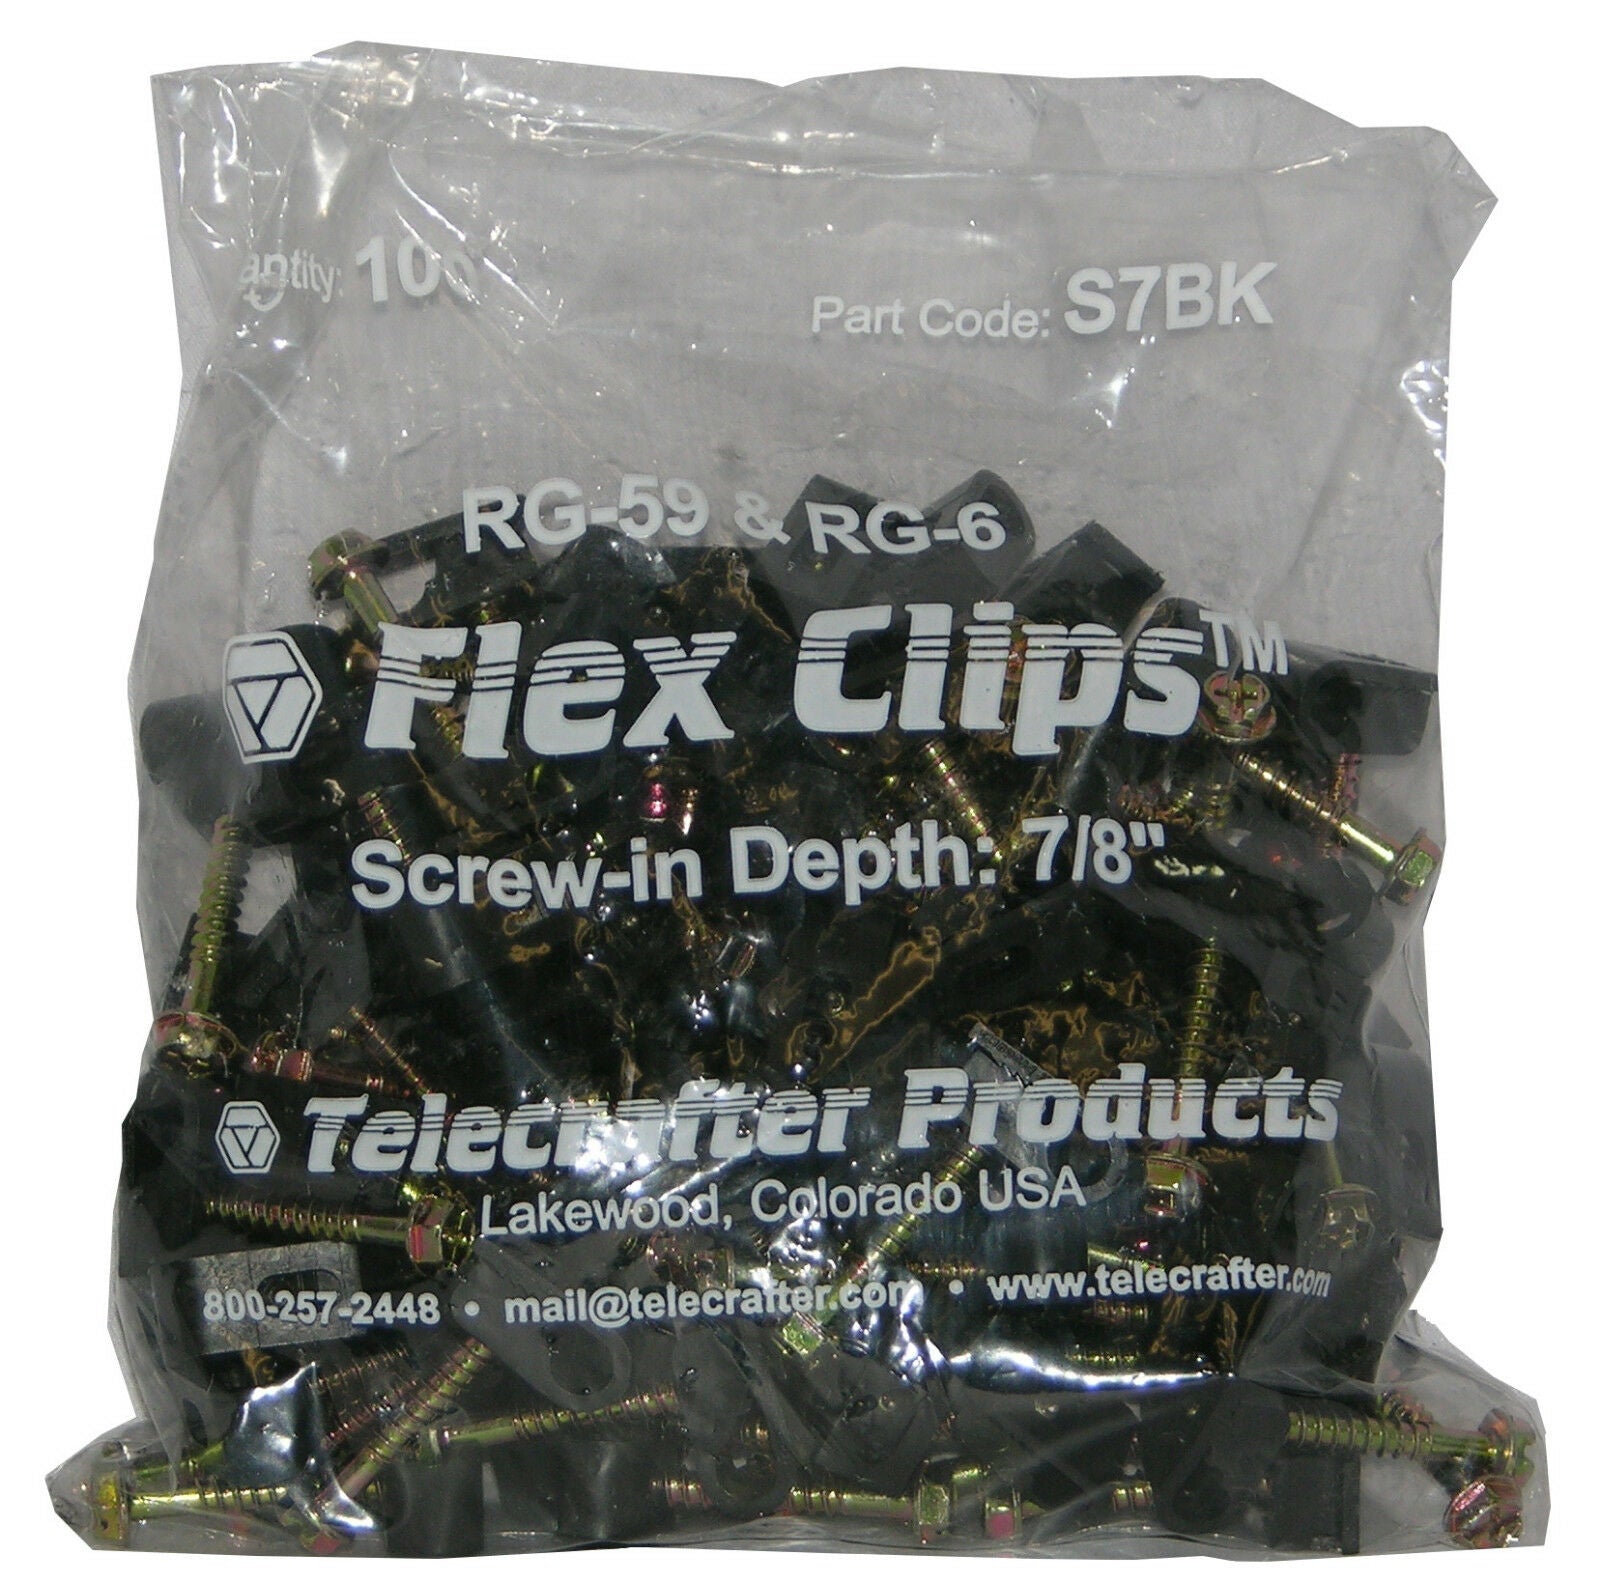 Telecrafter, Telecrafter S7BK, Flex Clips for RG-6 or RG59 Coax Cable, 7/8" screw, 100/bag